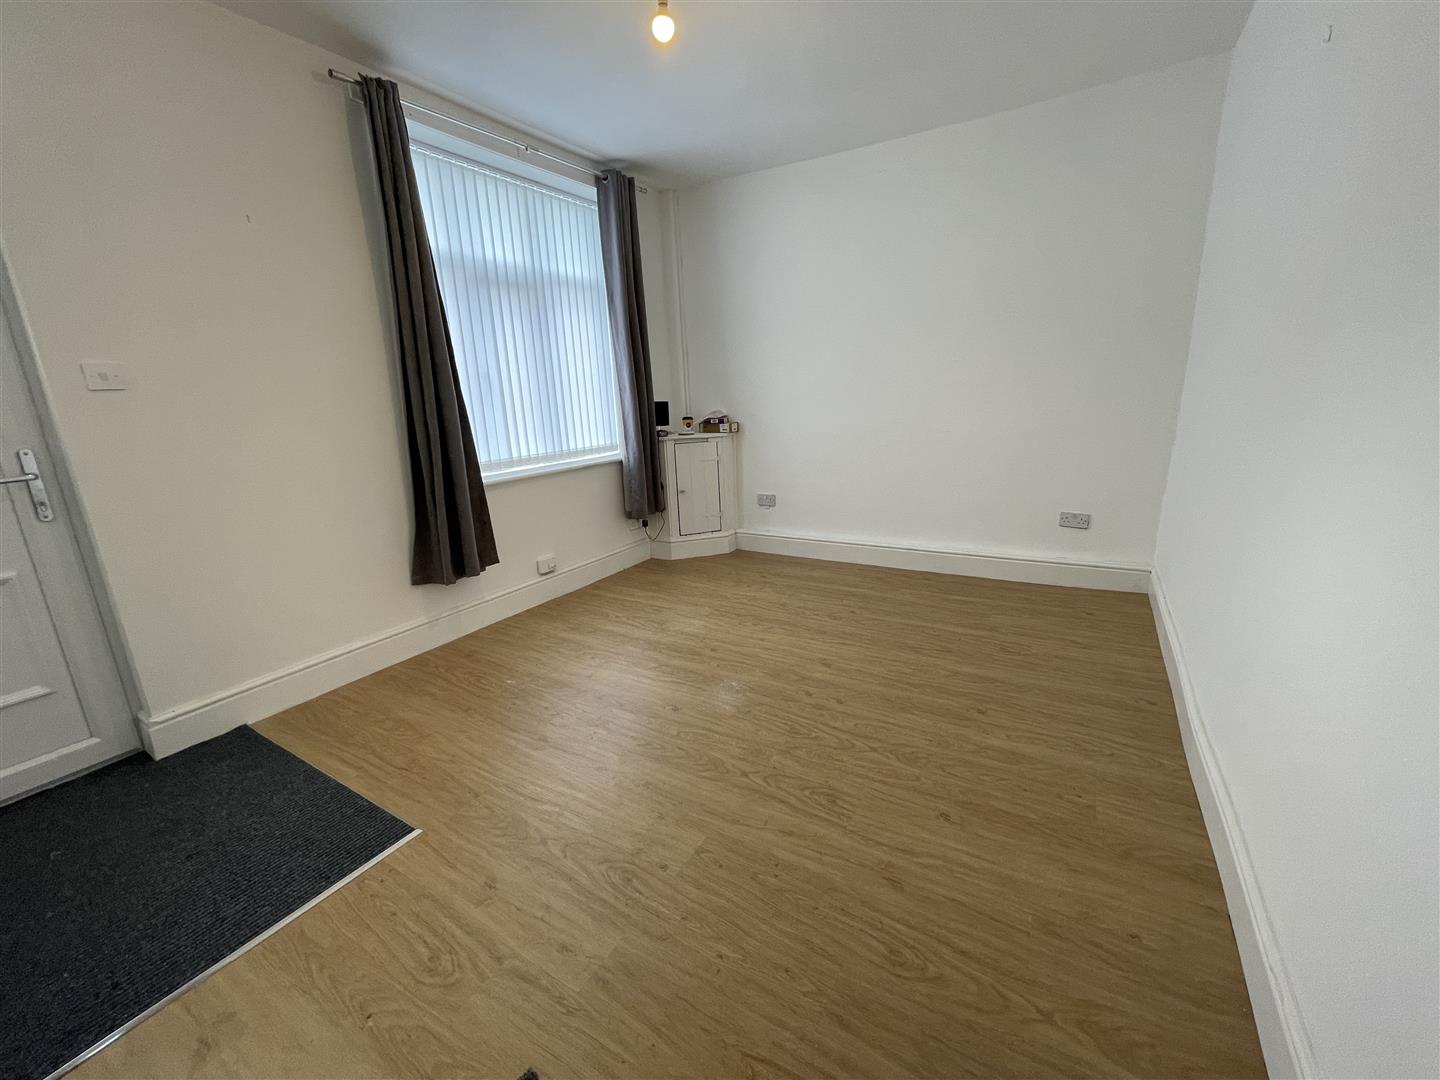 3 bed house to rent in Woodbine Road, Burnley - Property Image 1